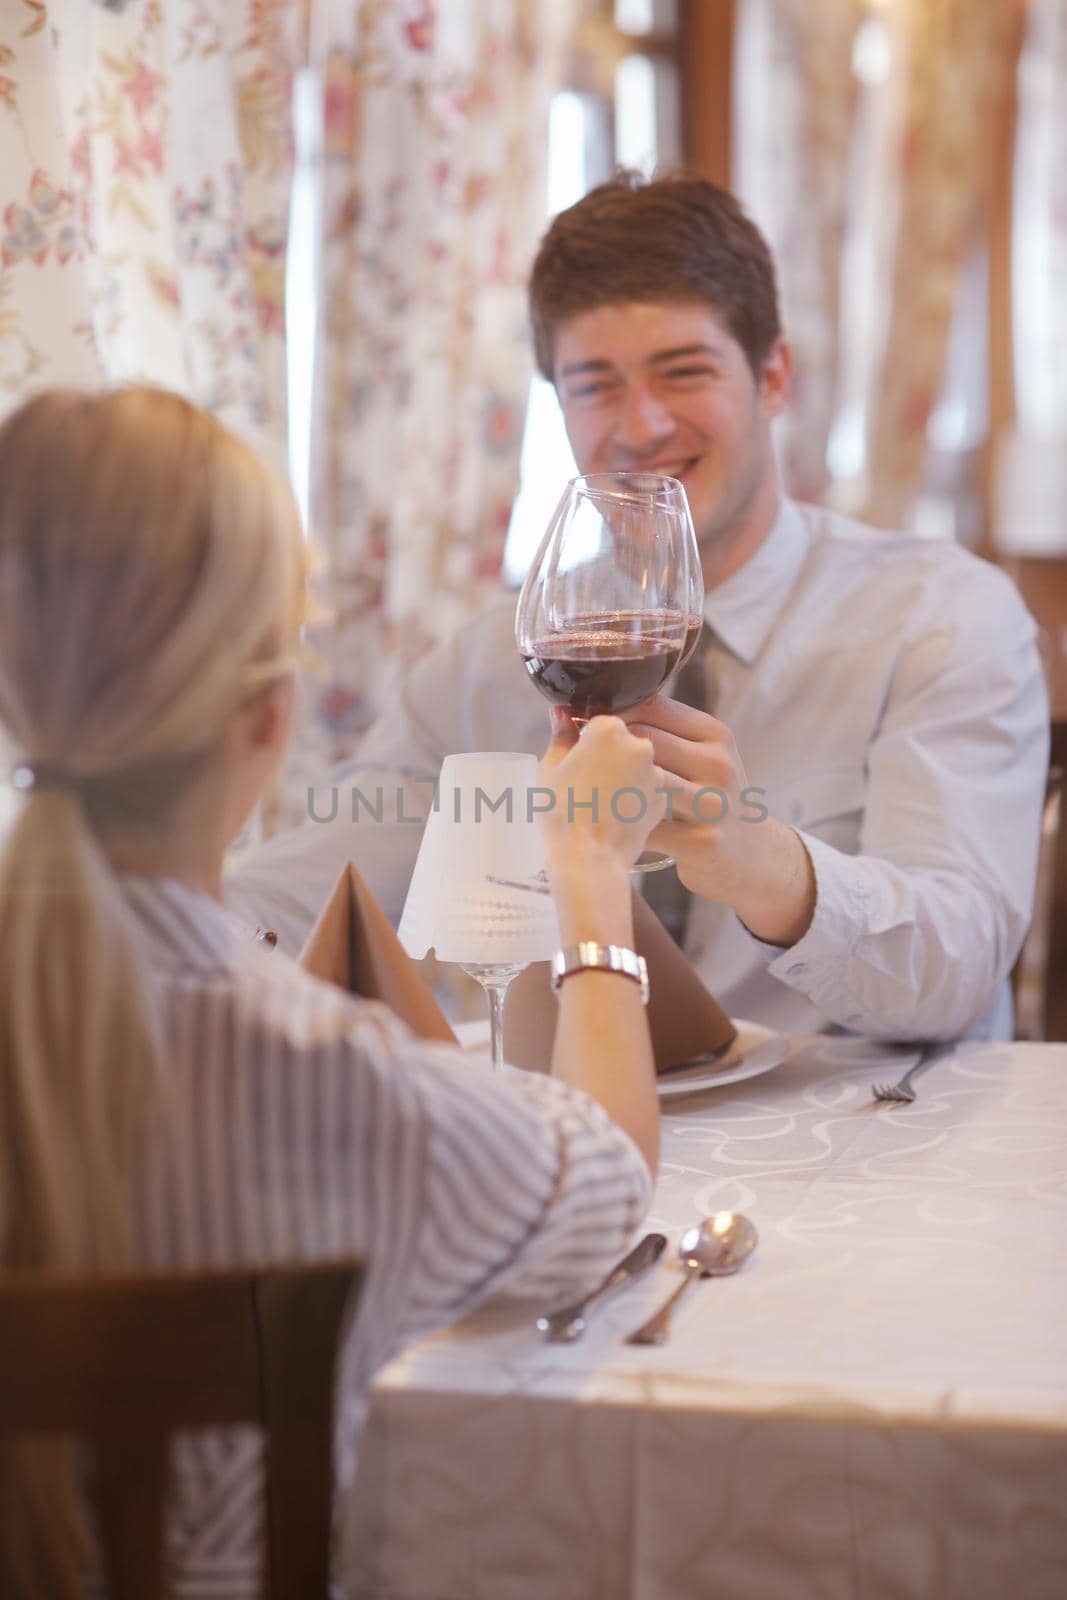 A young couple having dinner at a restaurant